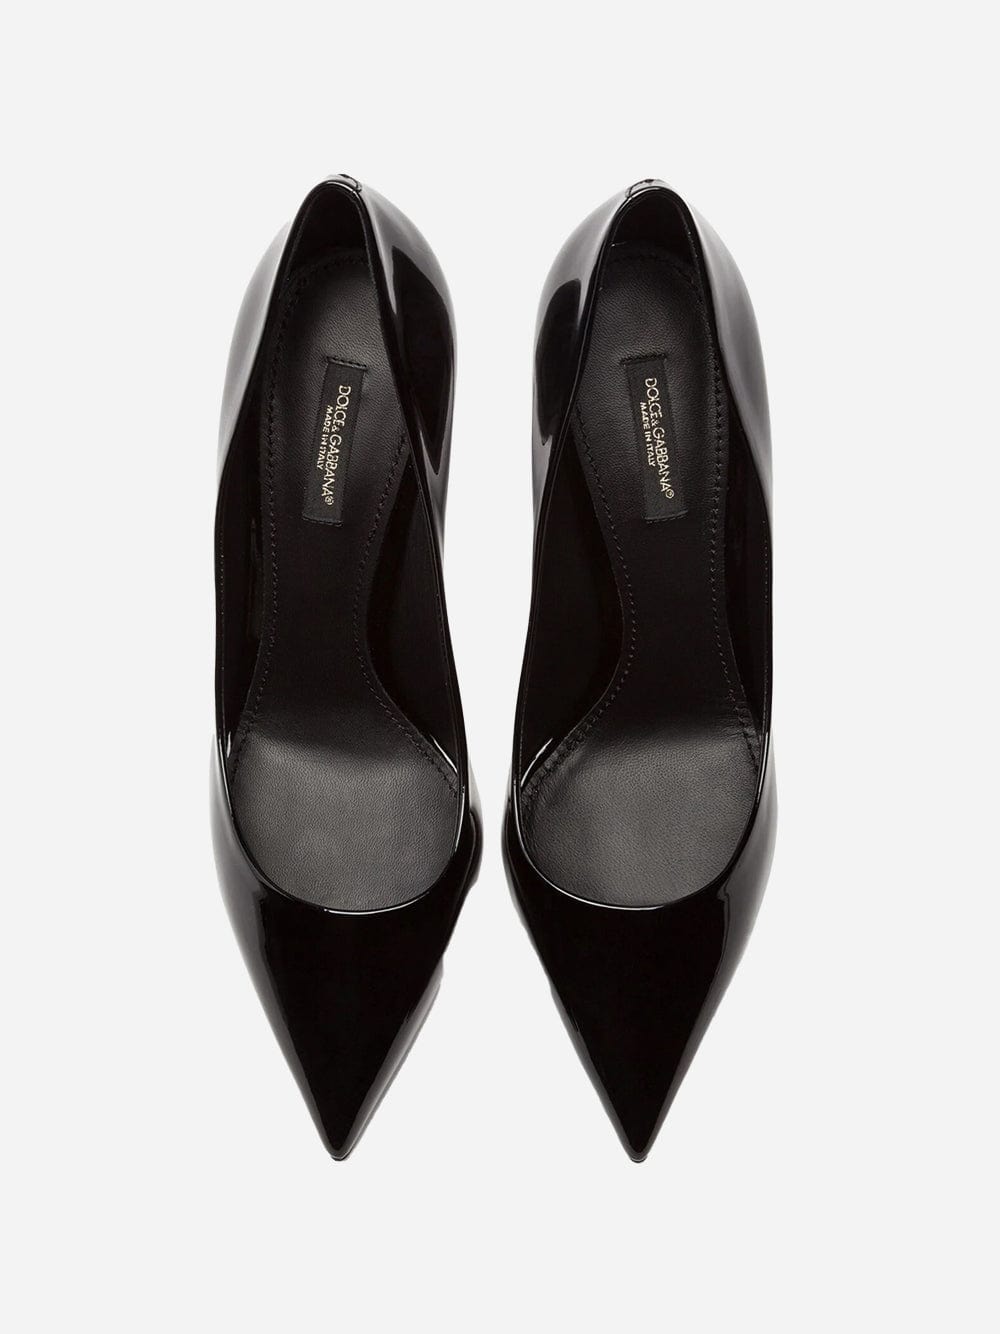 Dolce & Gabbana Polished Pointed-Toe Pumps